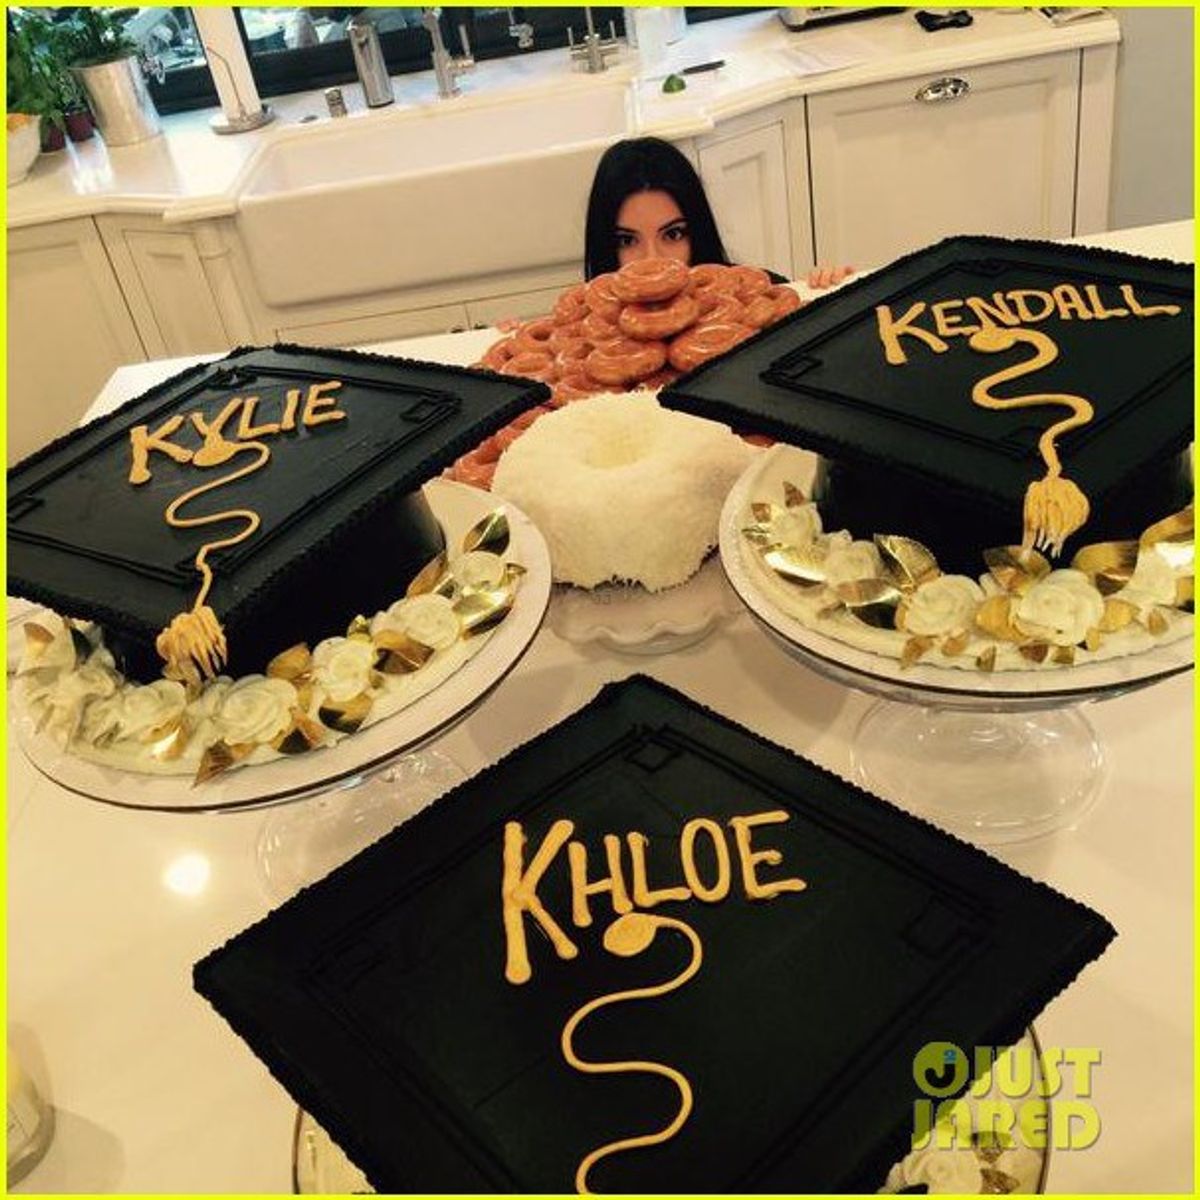 The End Of Spring Semester As Told By The Kardashians